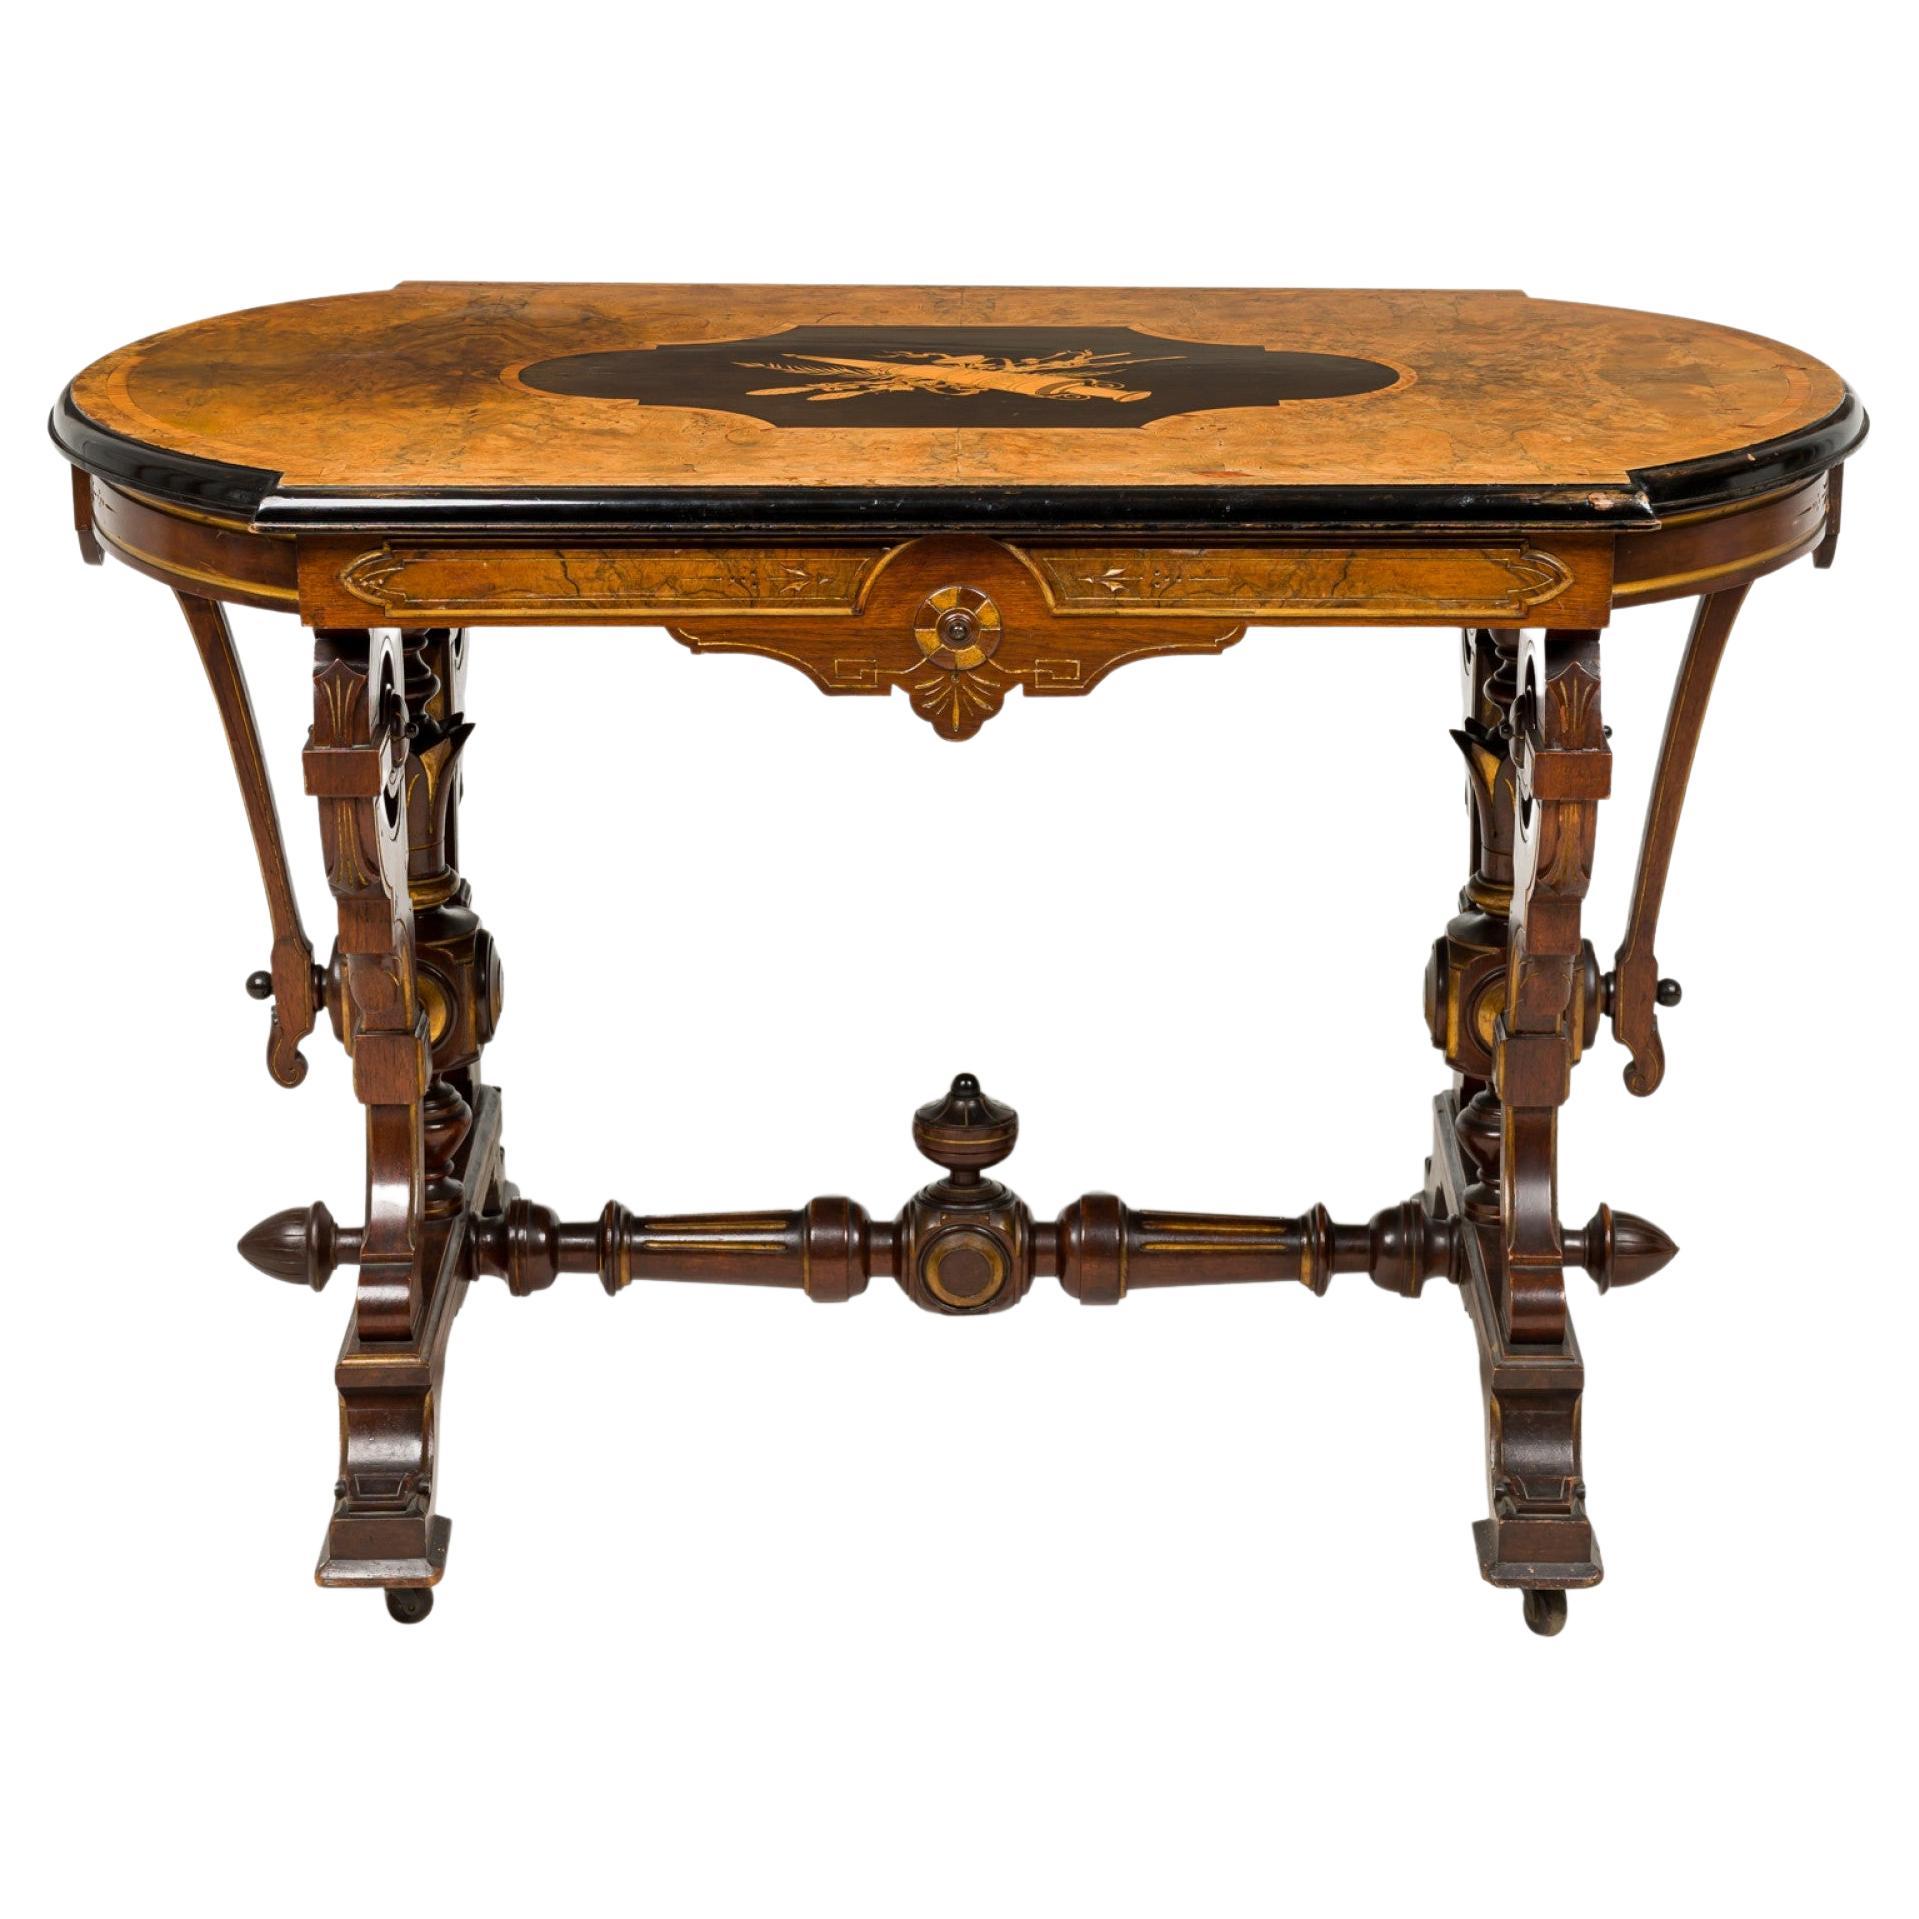 American Victorian Mahogany Inlaid Center Table with Elaborate Scrollwork